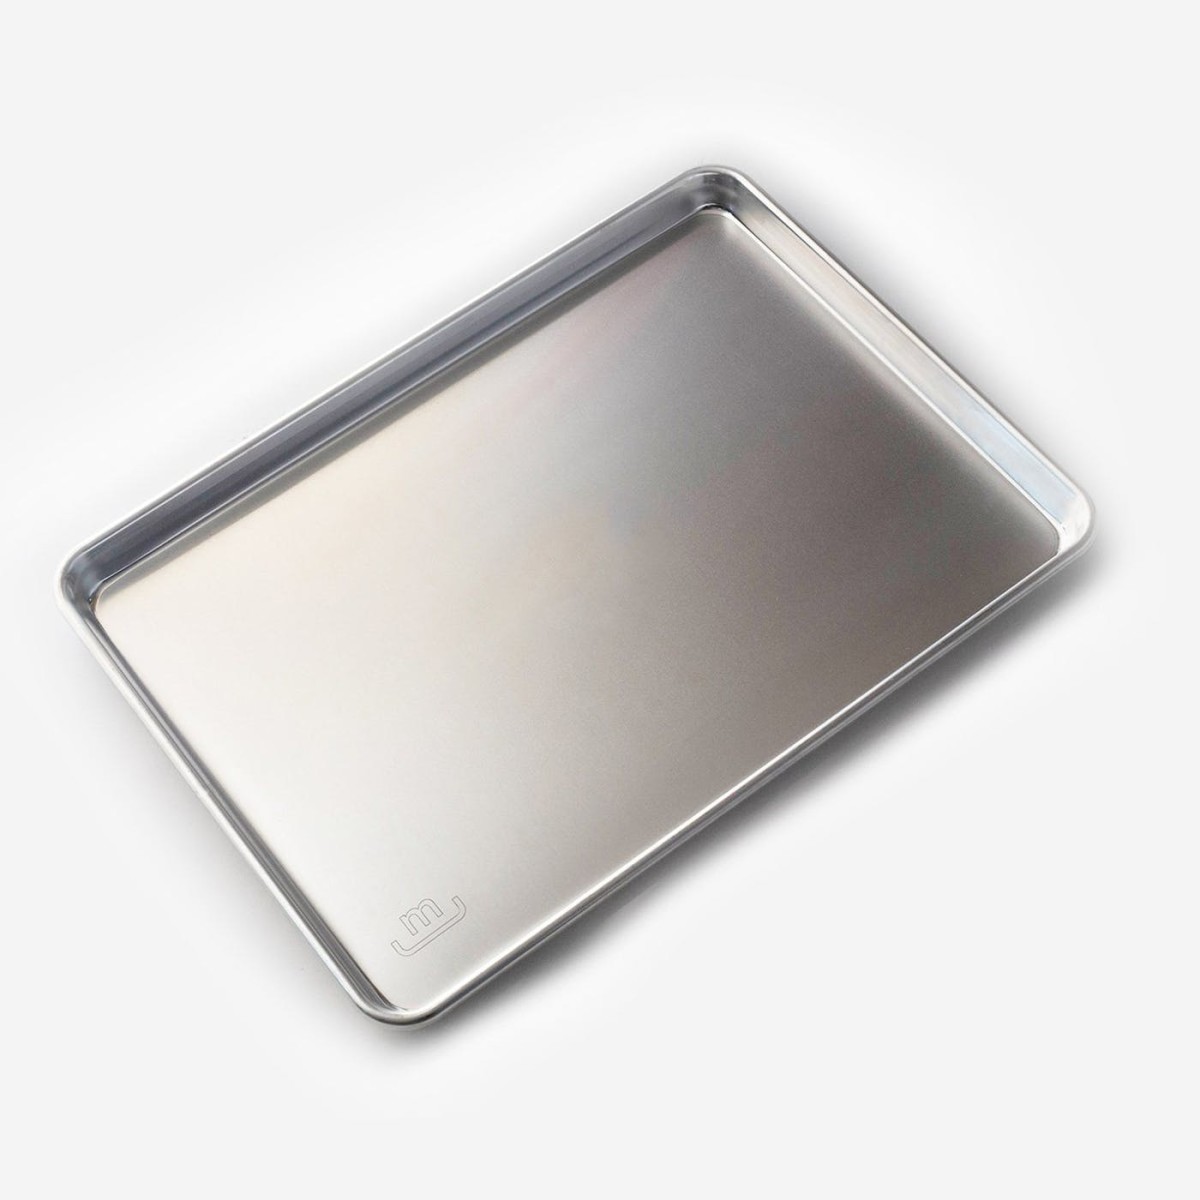 Aluminum sheet pan by Made In